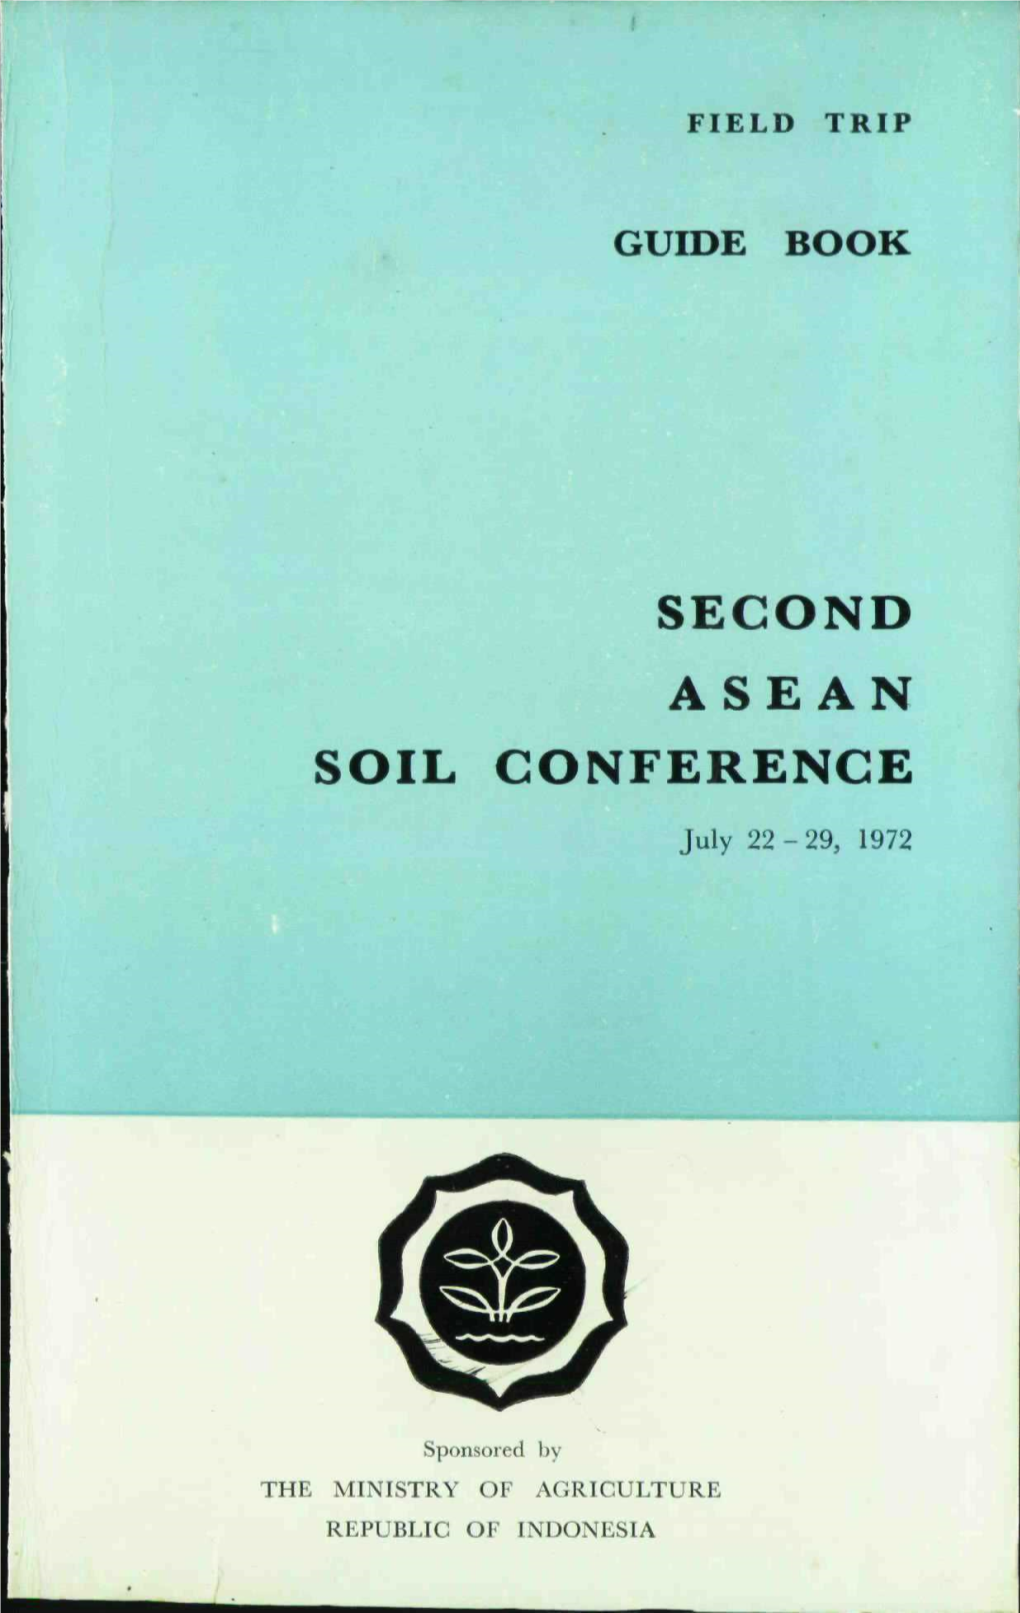 Second Asean Soil Conference